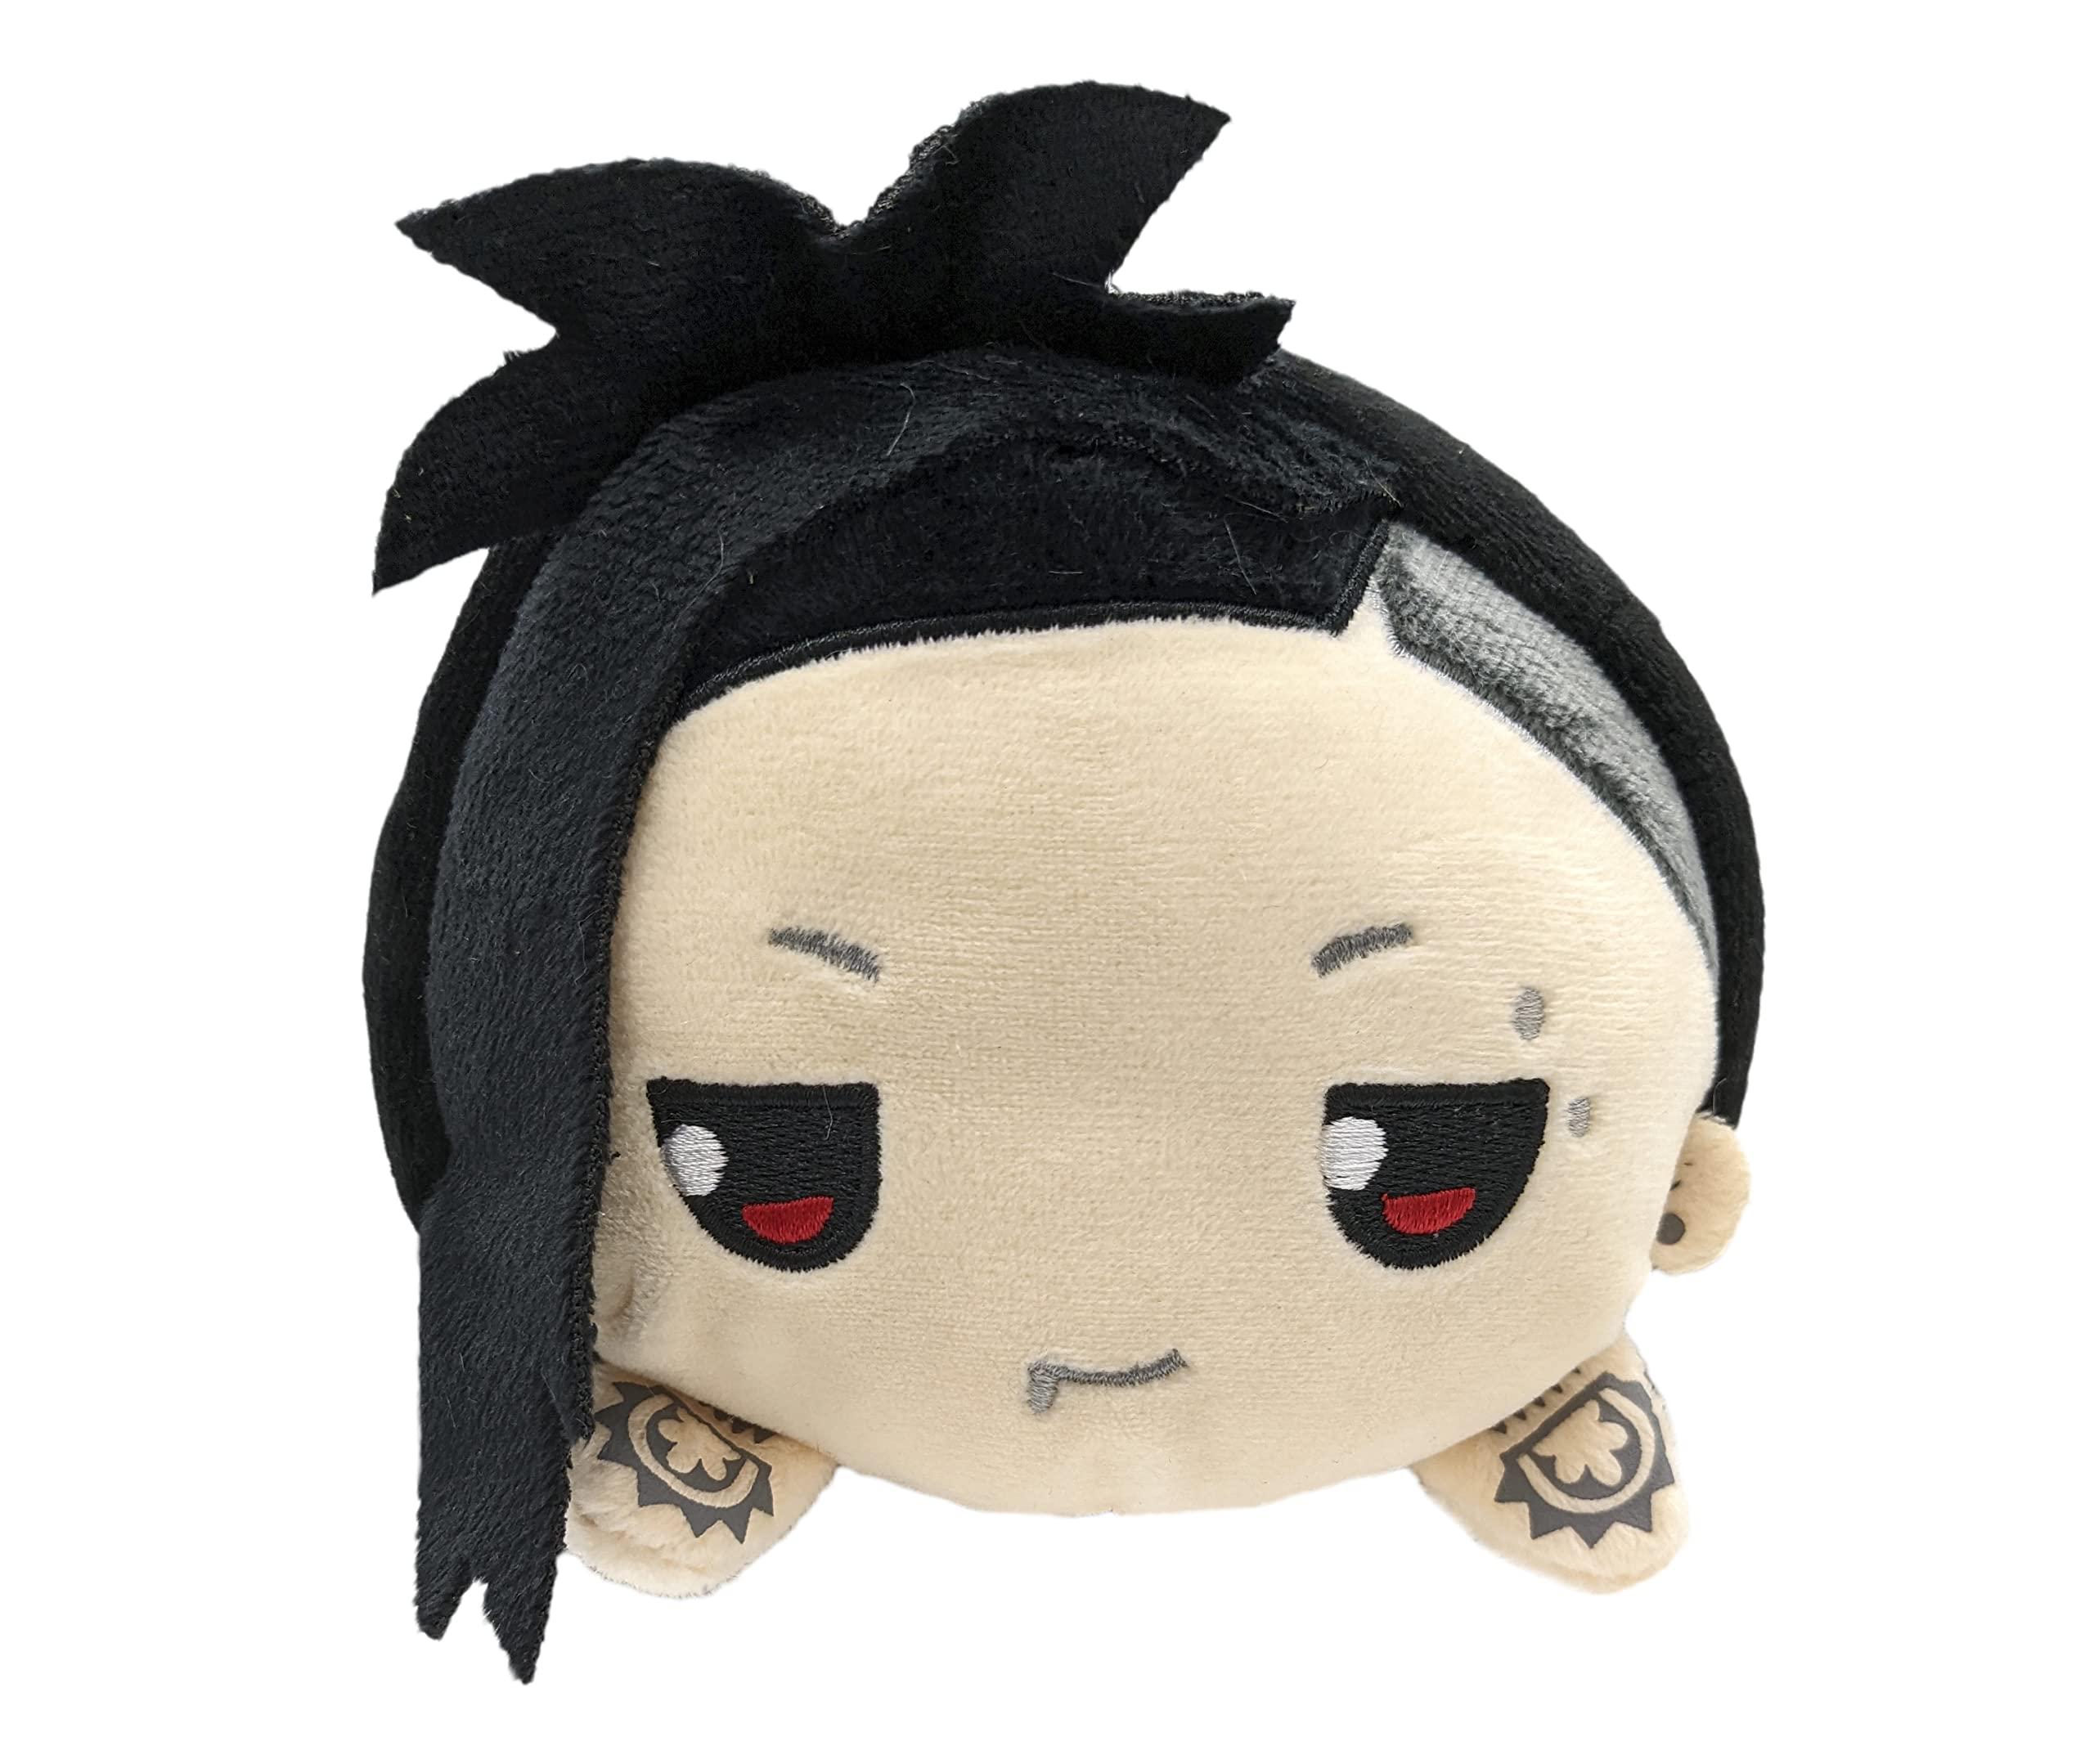 mochibi - tokyo ghoul - uta - plush toy, collectable, soft, 6", officially licensed, stackable, anime